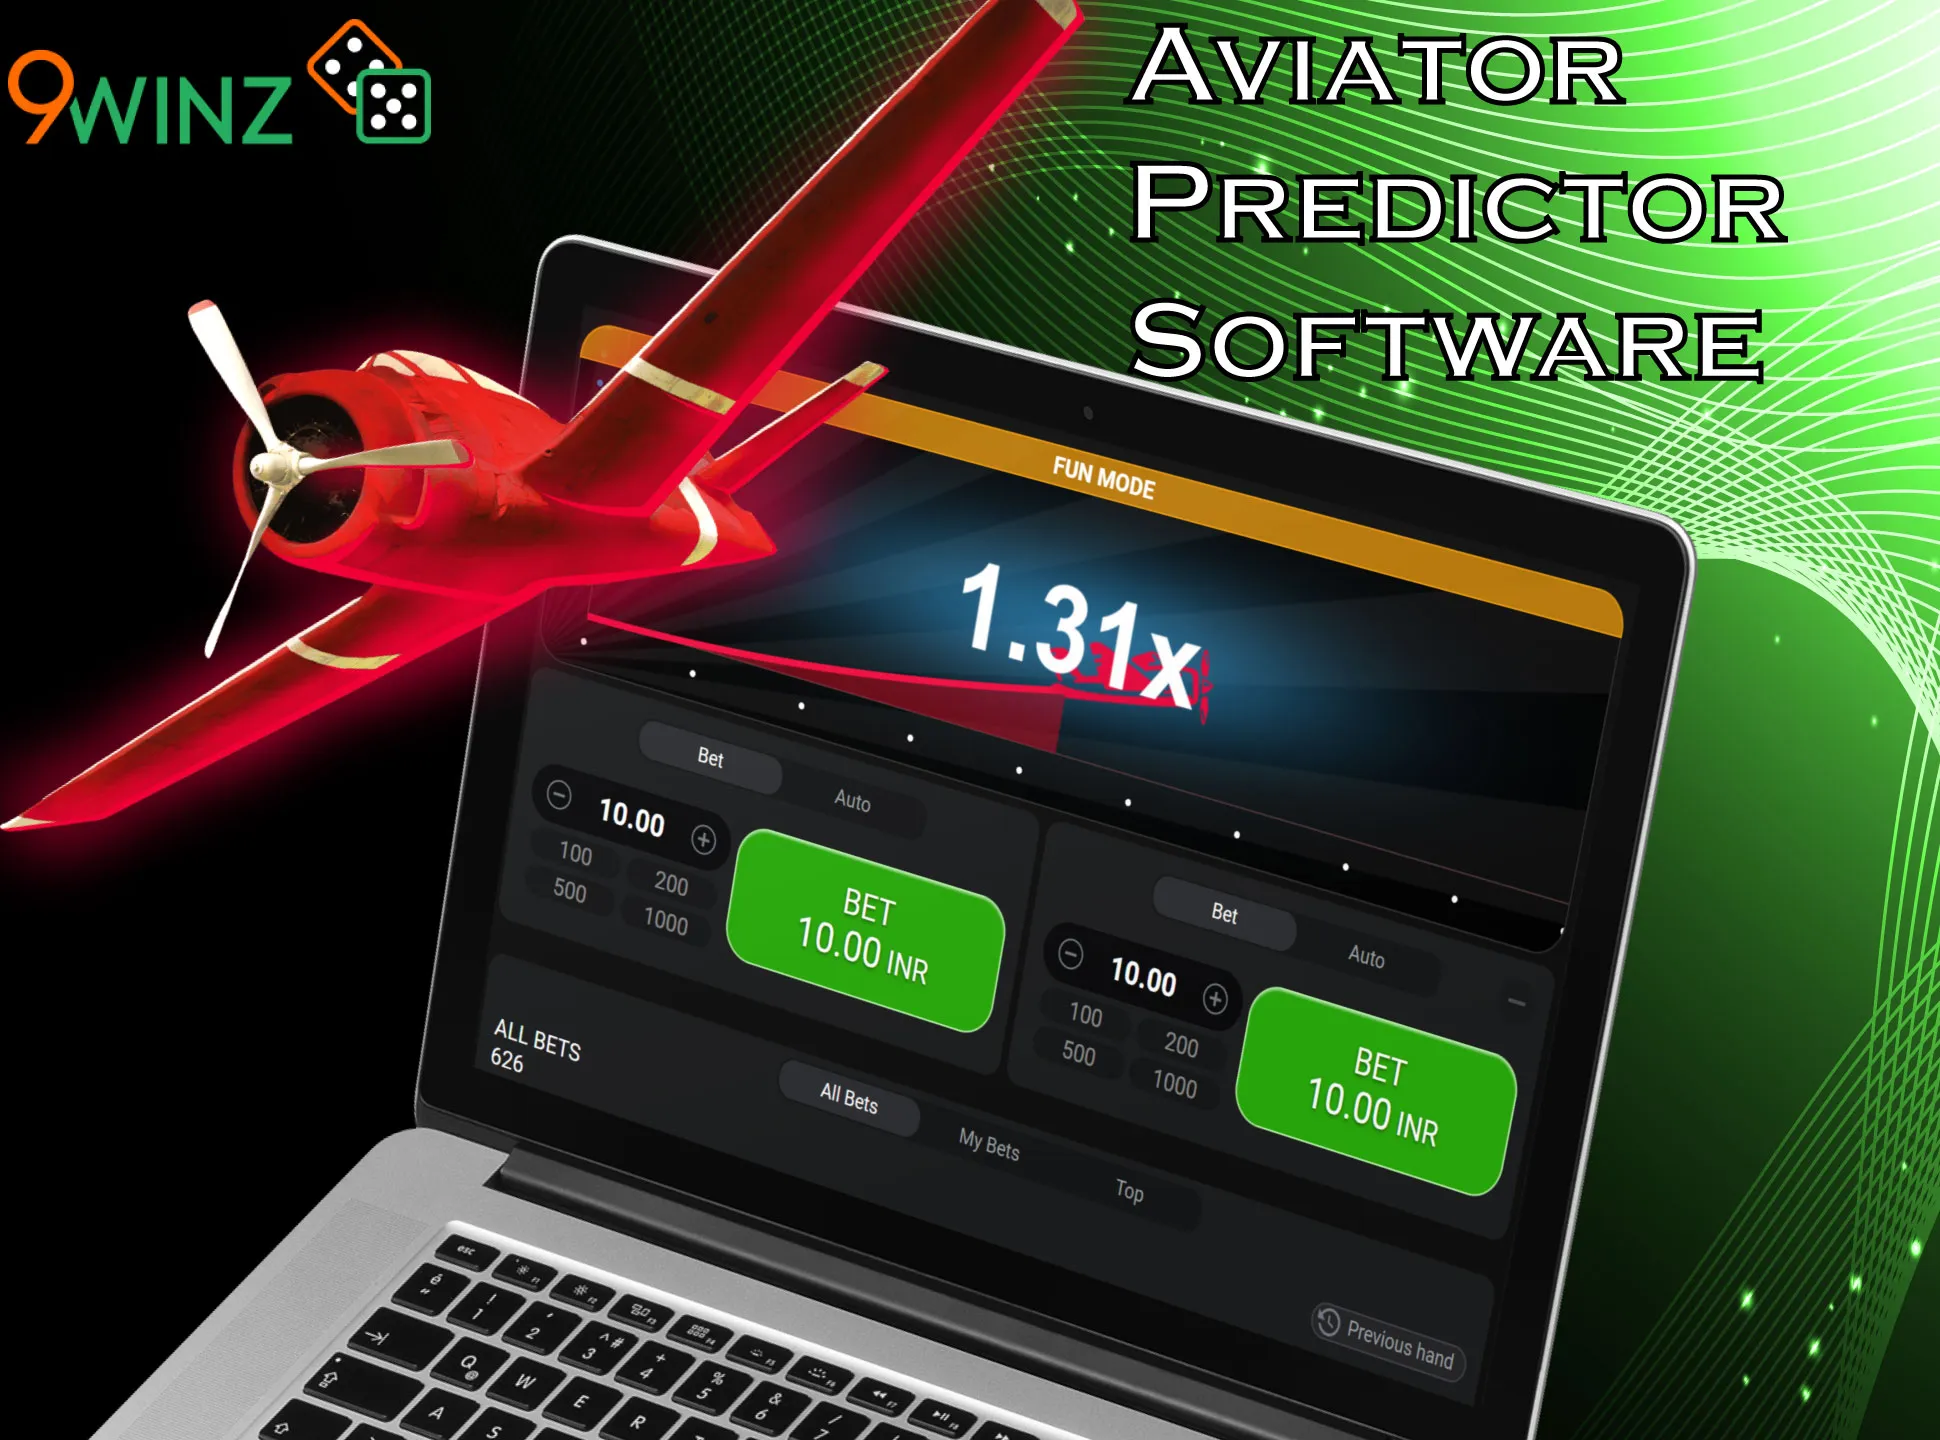 Predictor software can't help you win Aviator.